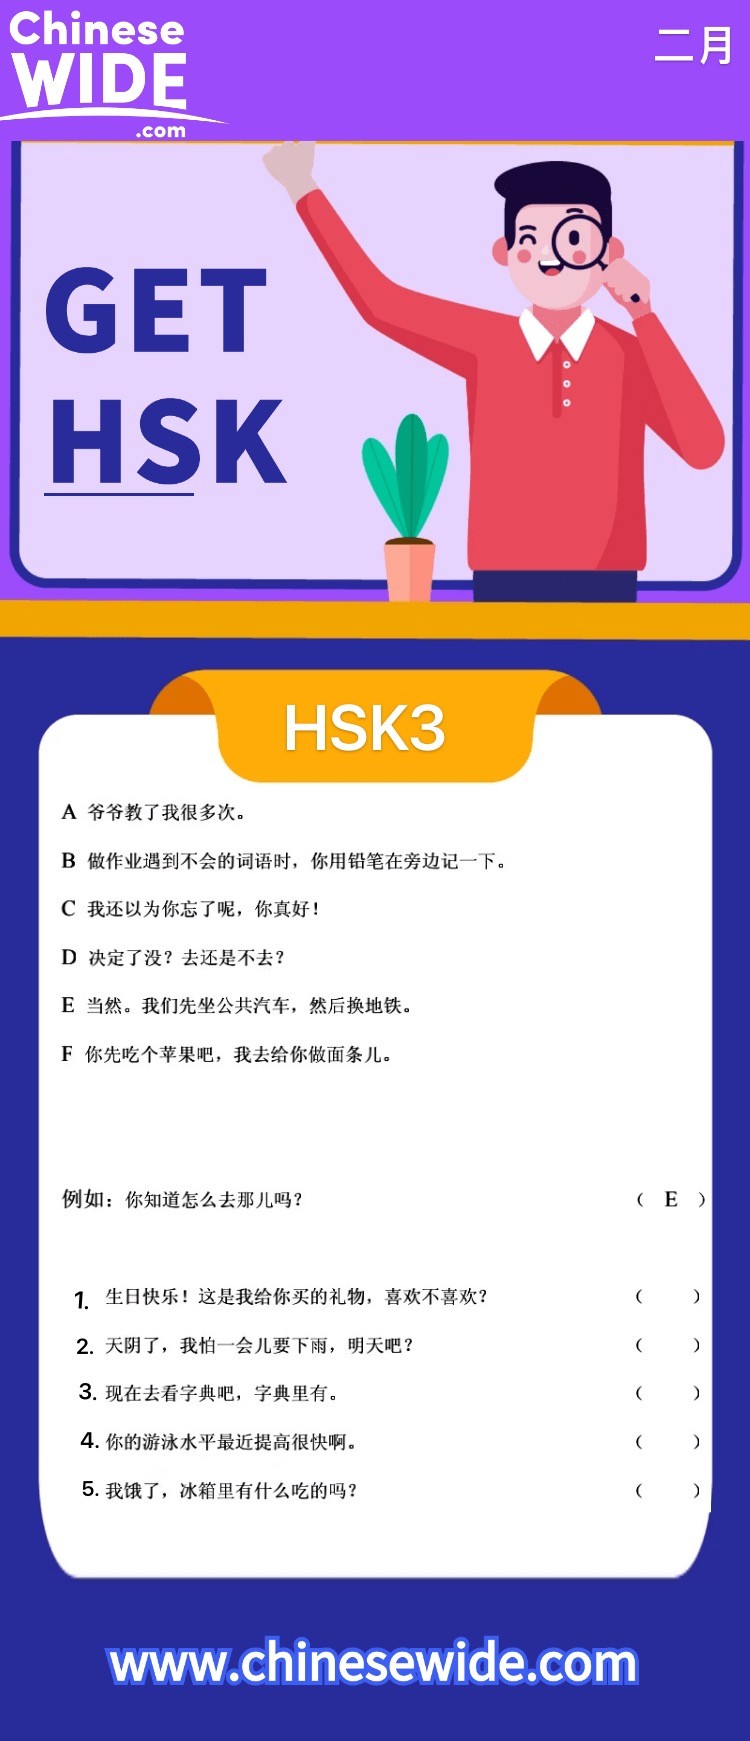 ChineseWide Learn Chinese Blogs HSK3